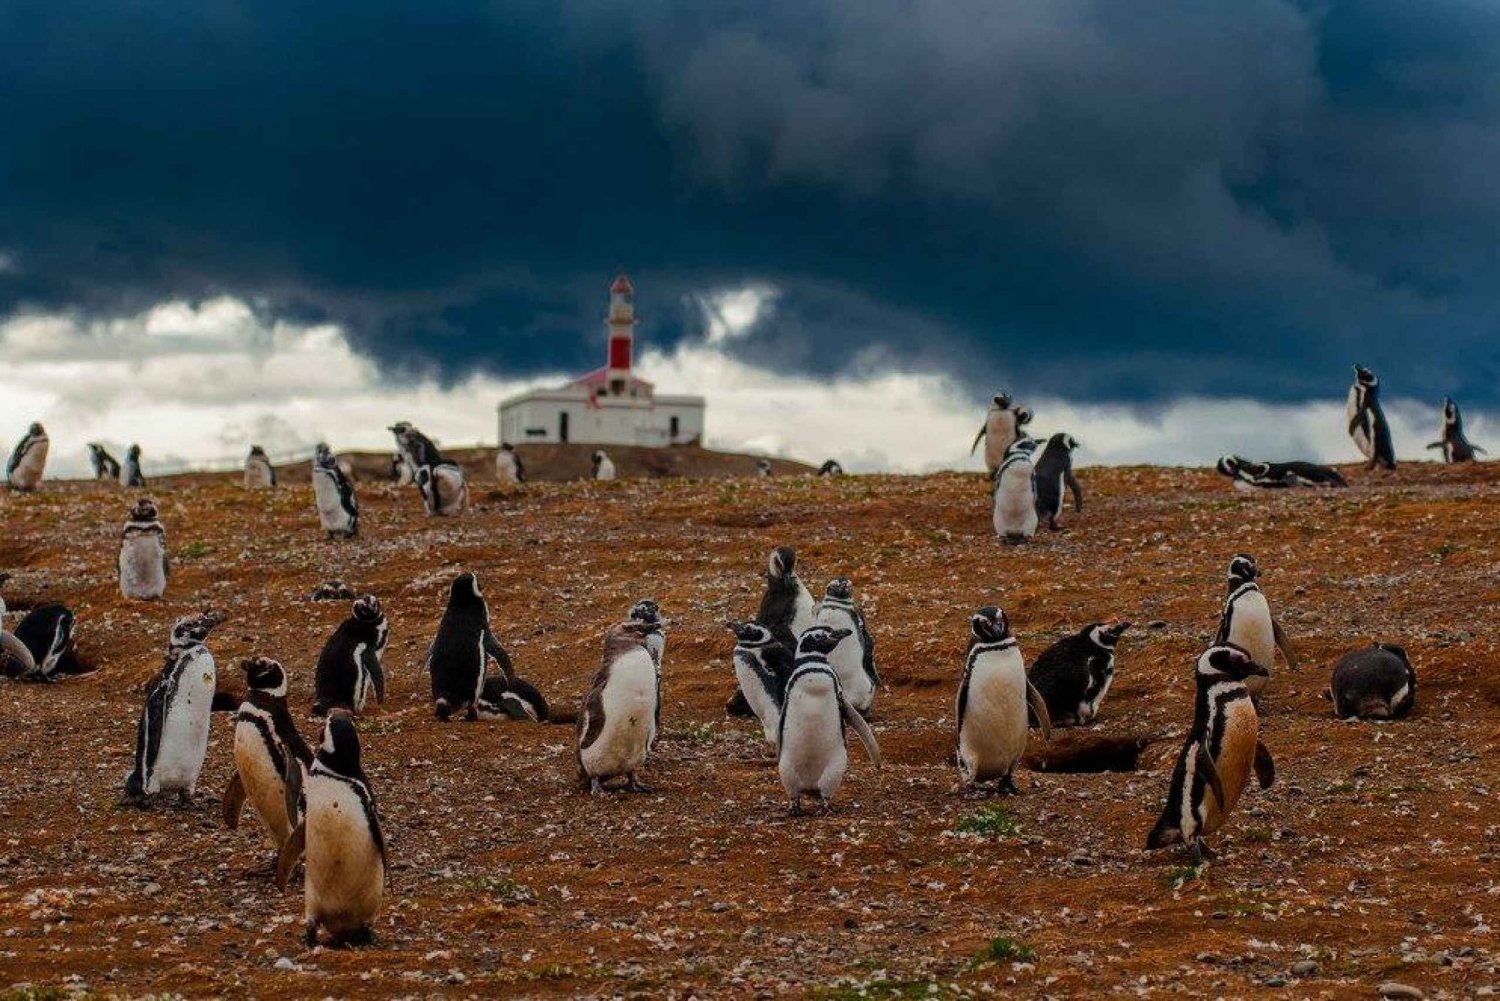 Magdalena Island Penguin Tour by Boat from Punta Arenas